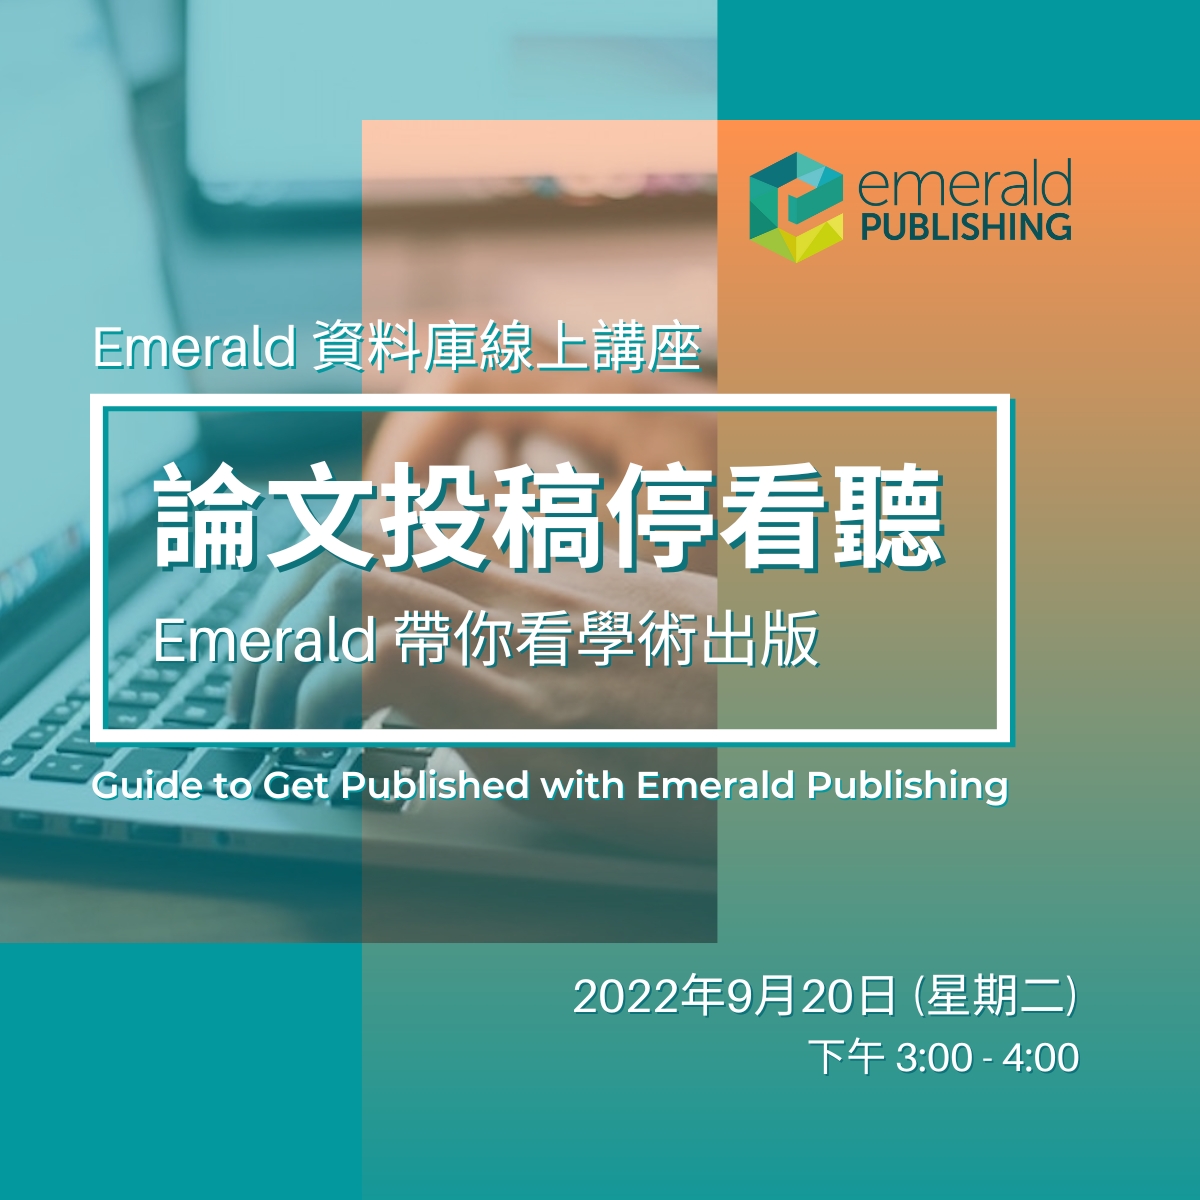 EMERALD WEBINAR 網絡研討會: Guide to Get Published with Emerald Publishing 論文投稿停看聽—Emerald 帶你看學術出版